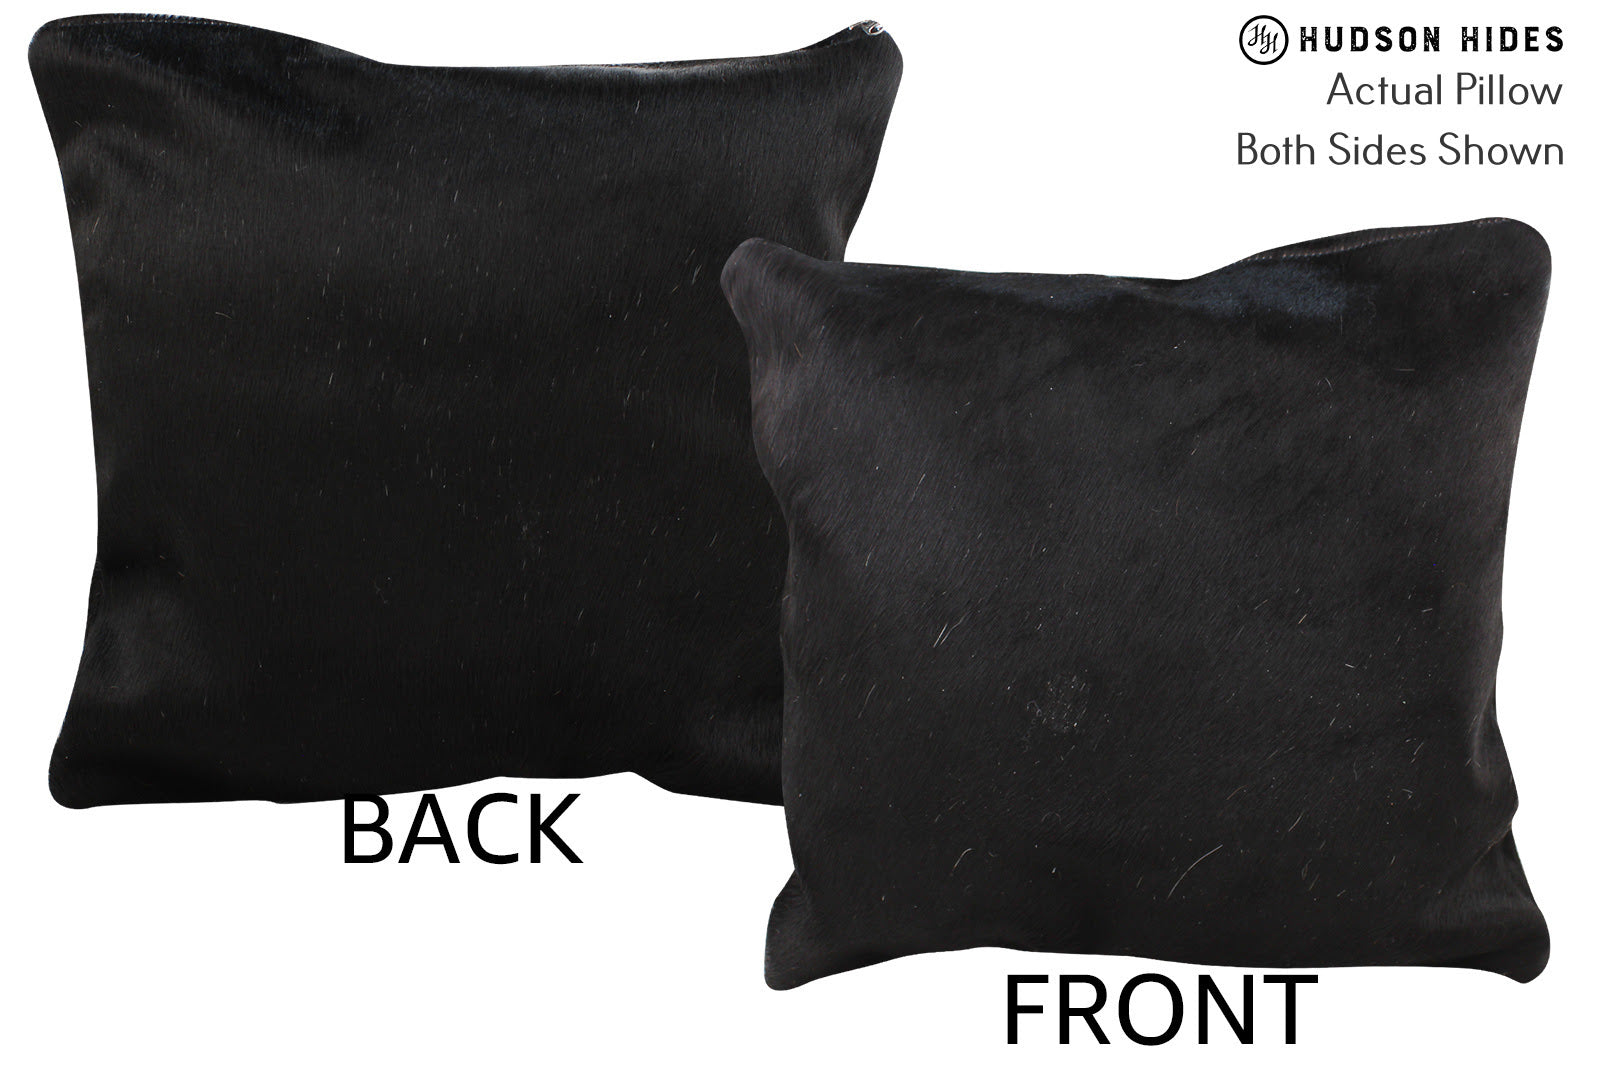 Solid Black Cowhide Pillow #74736